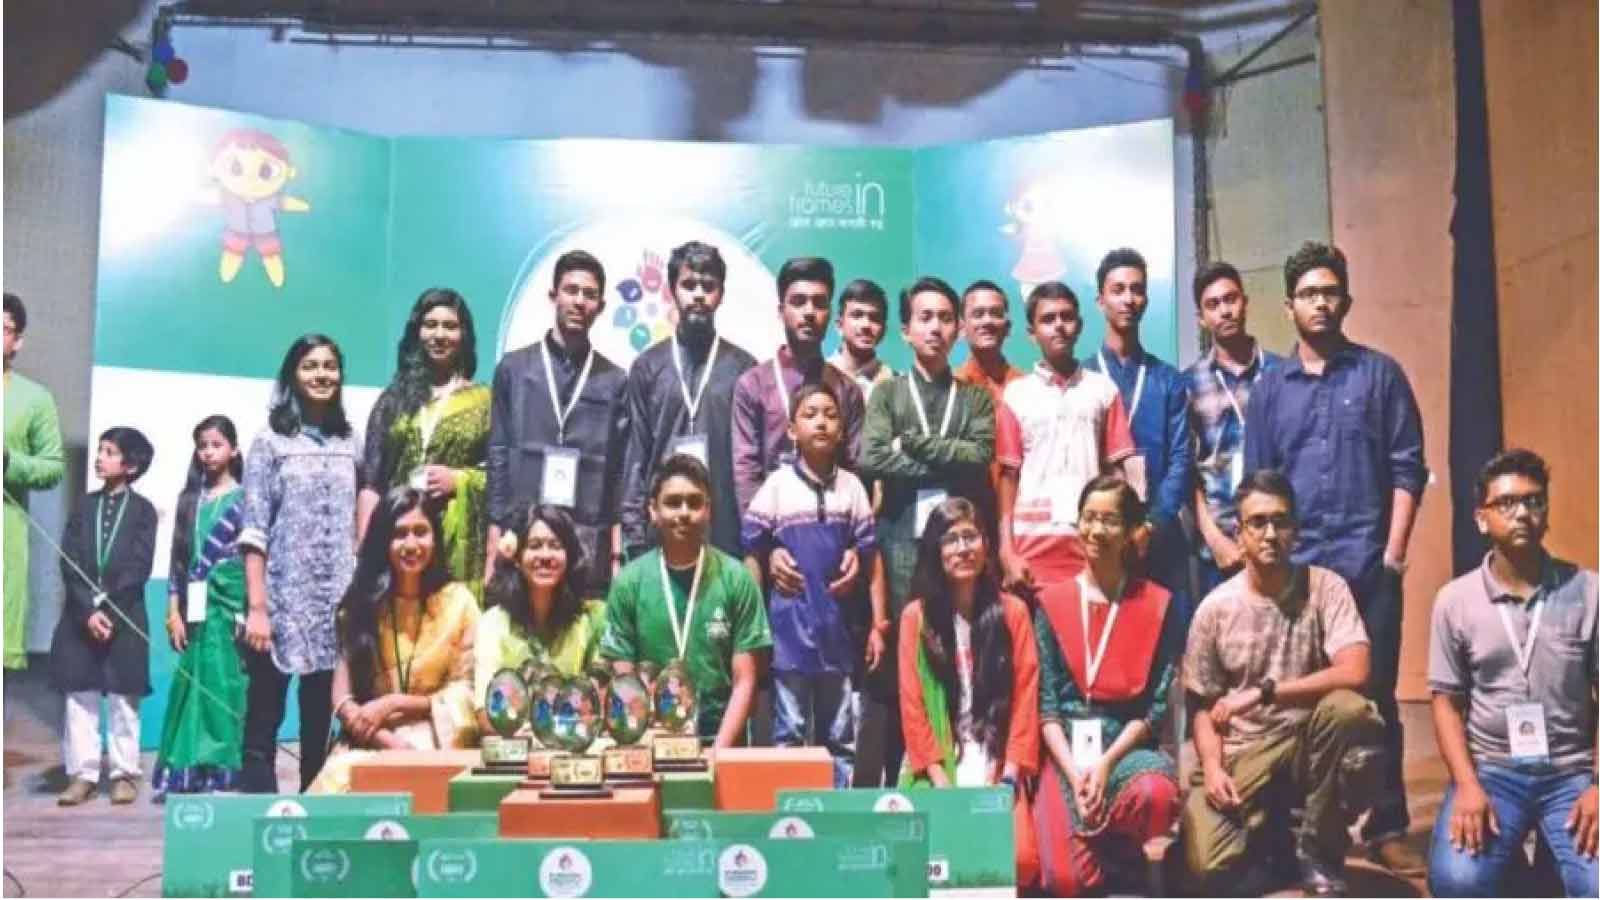 international Children's Film festival came to an end in Dhaka